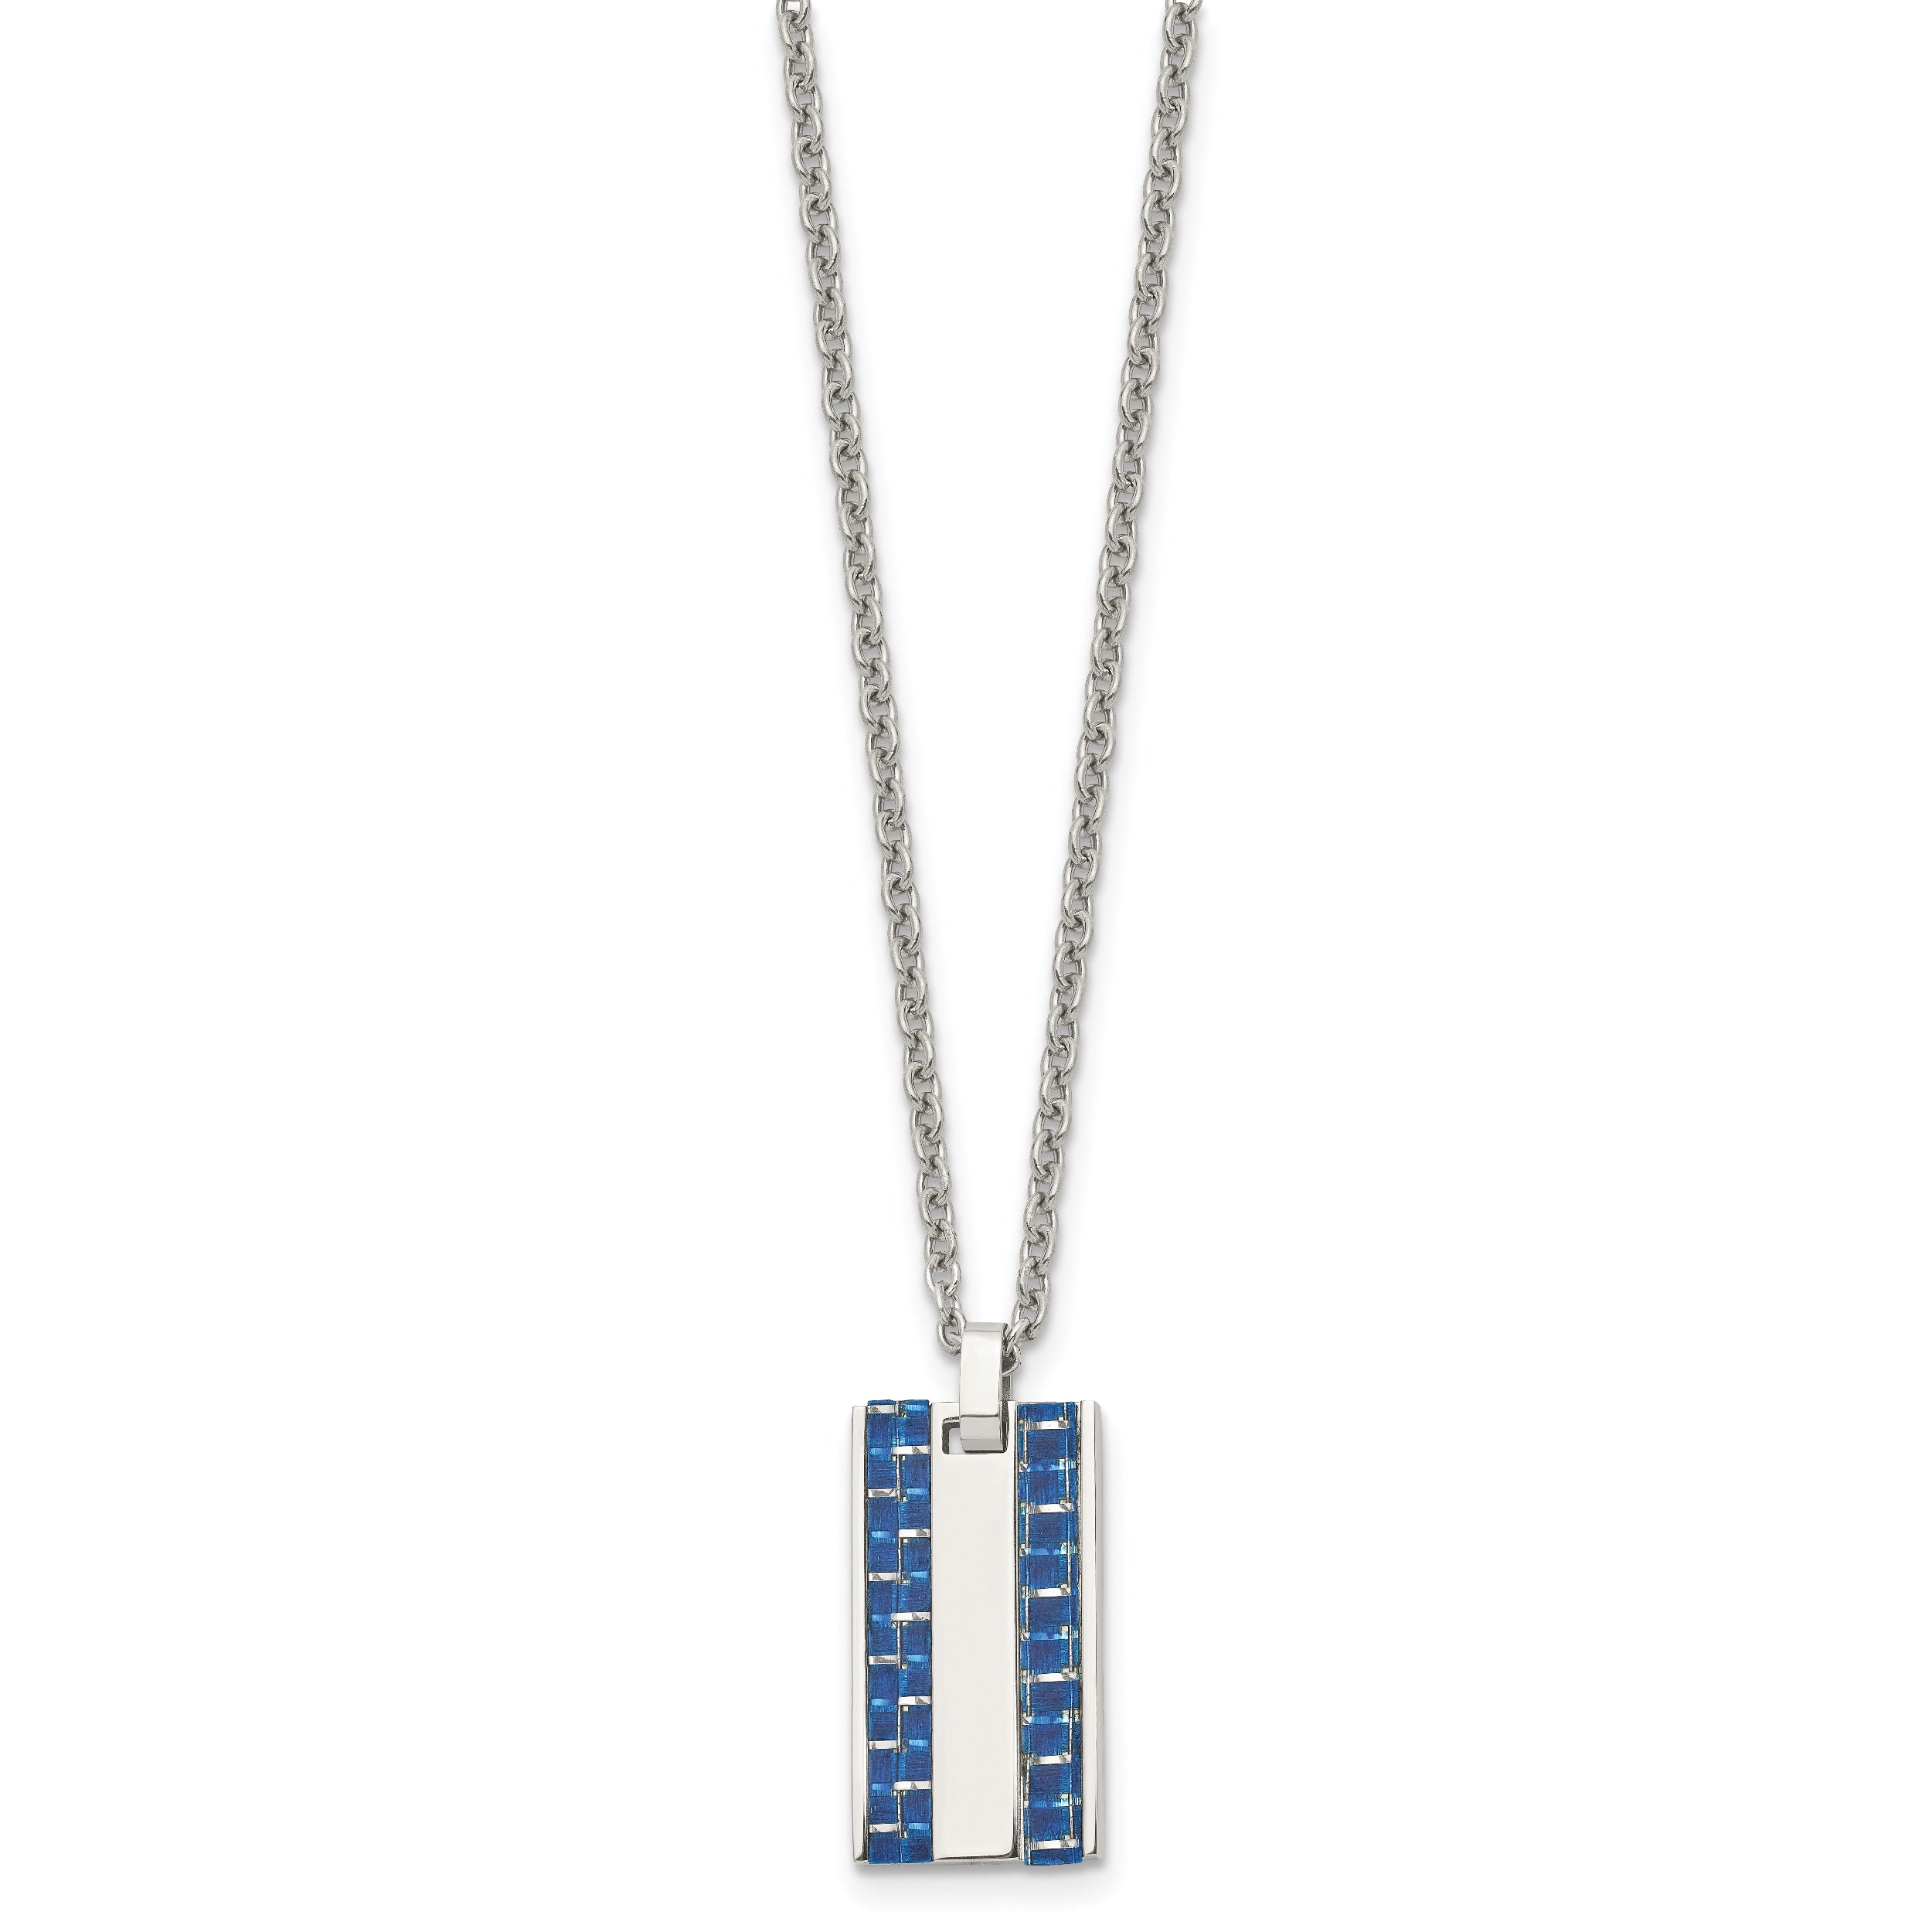 Chisel Stainless Steel Polished with Blue Carbon Fiber Inlay Dog Tag on a 22 inch Cable Chain Necklace